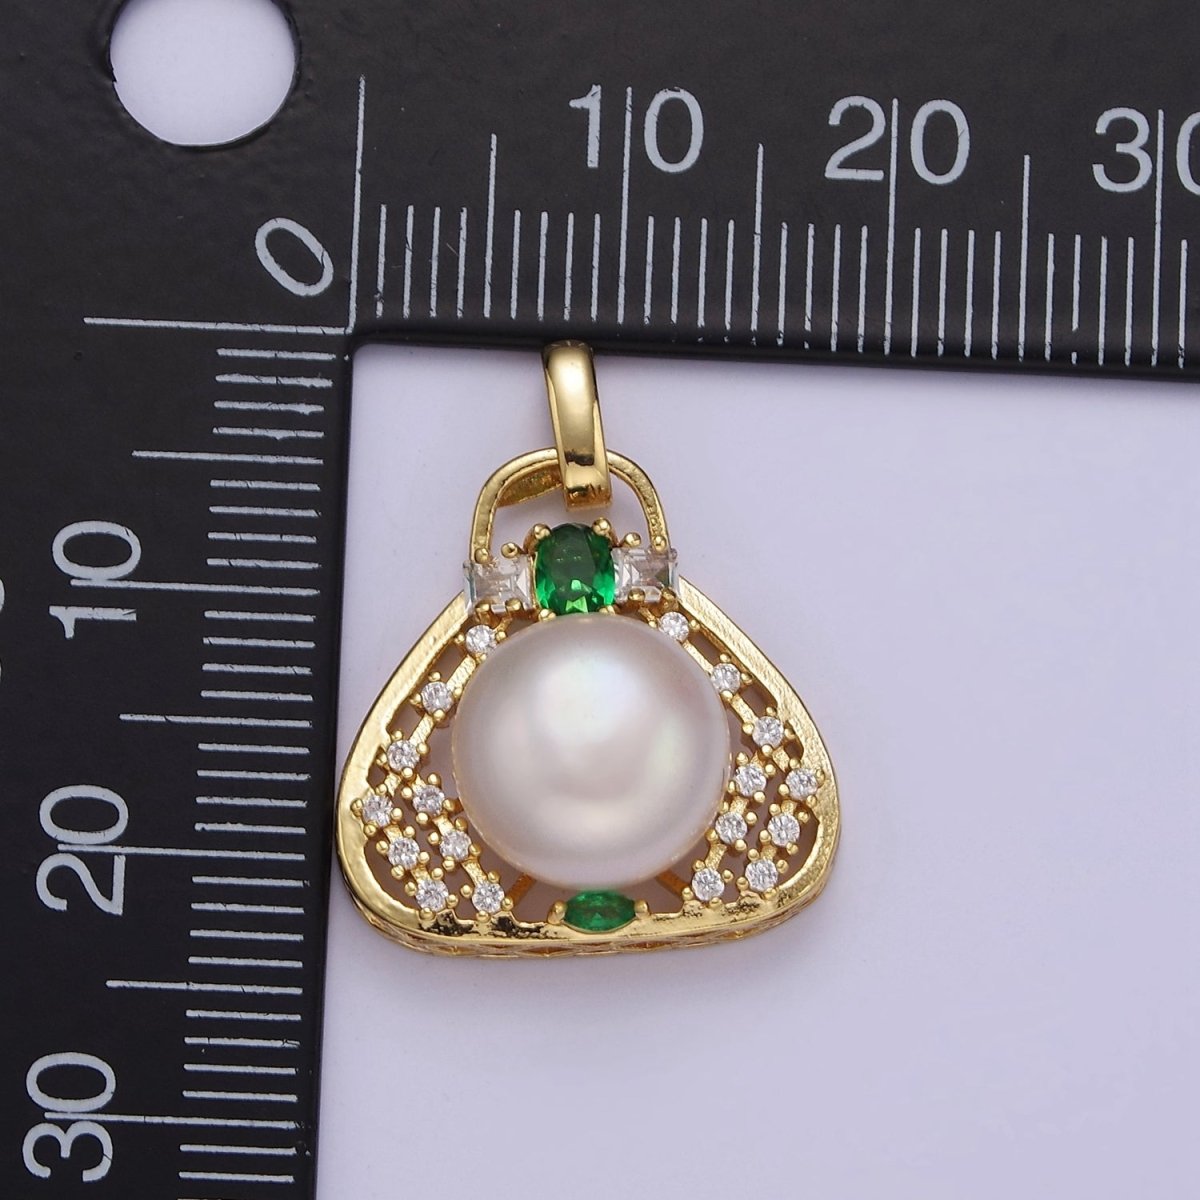 Mini Pearl Charm in a Purse Bag Charm for Bracelet Necklace Component J-465 - DLUXCA